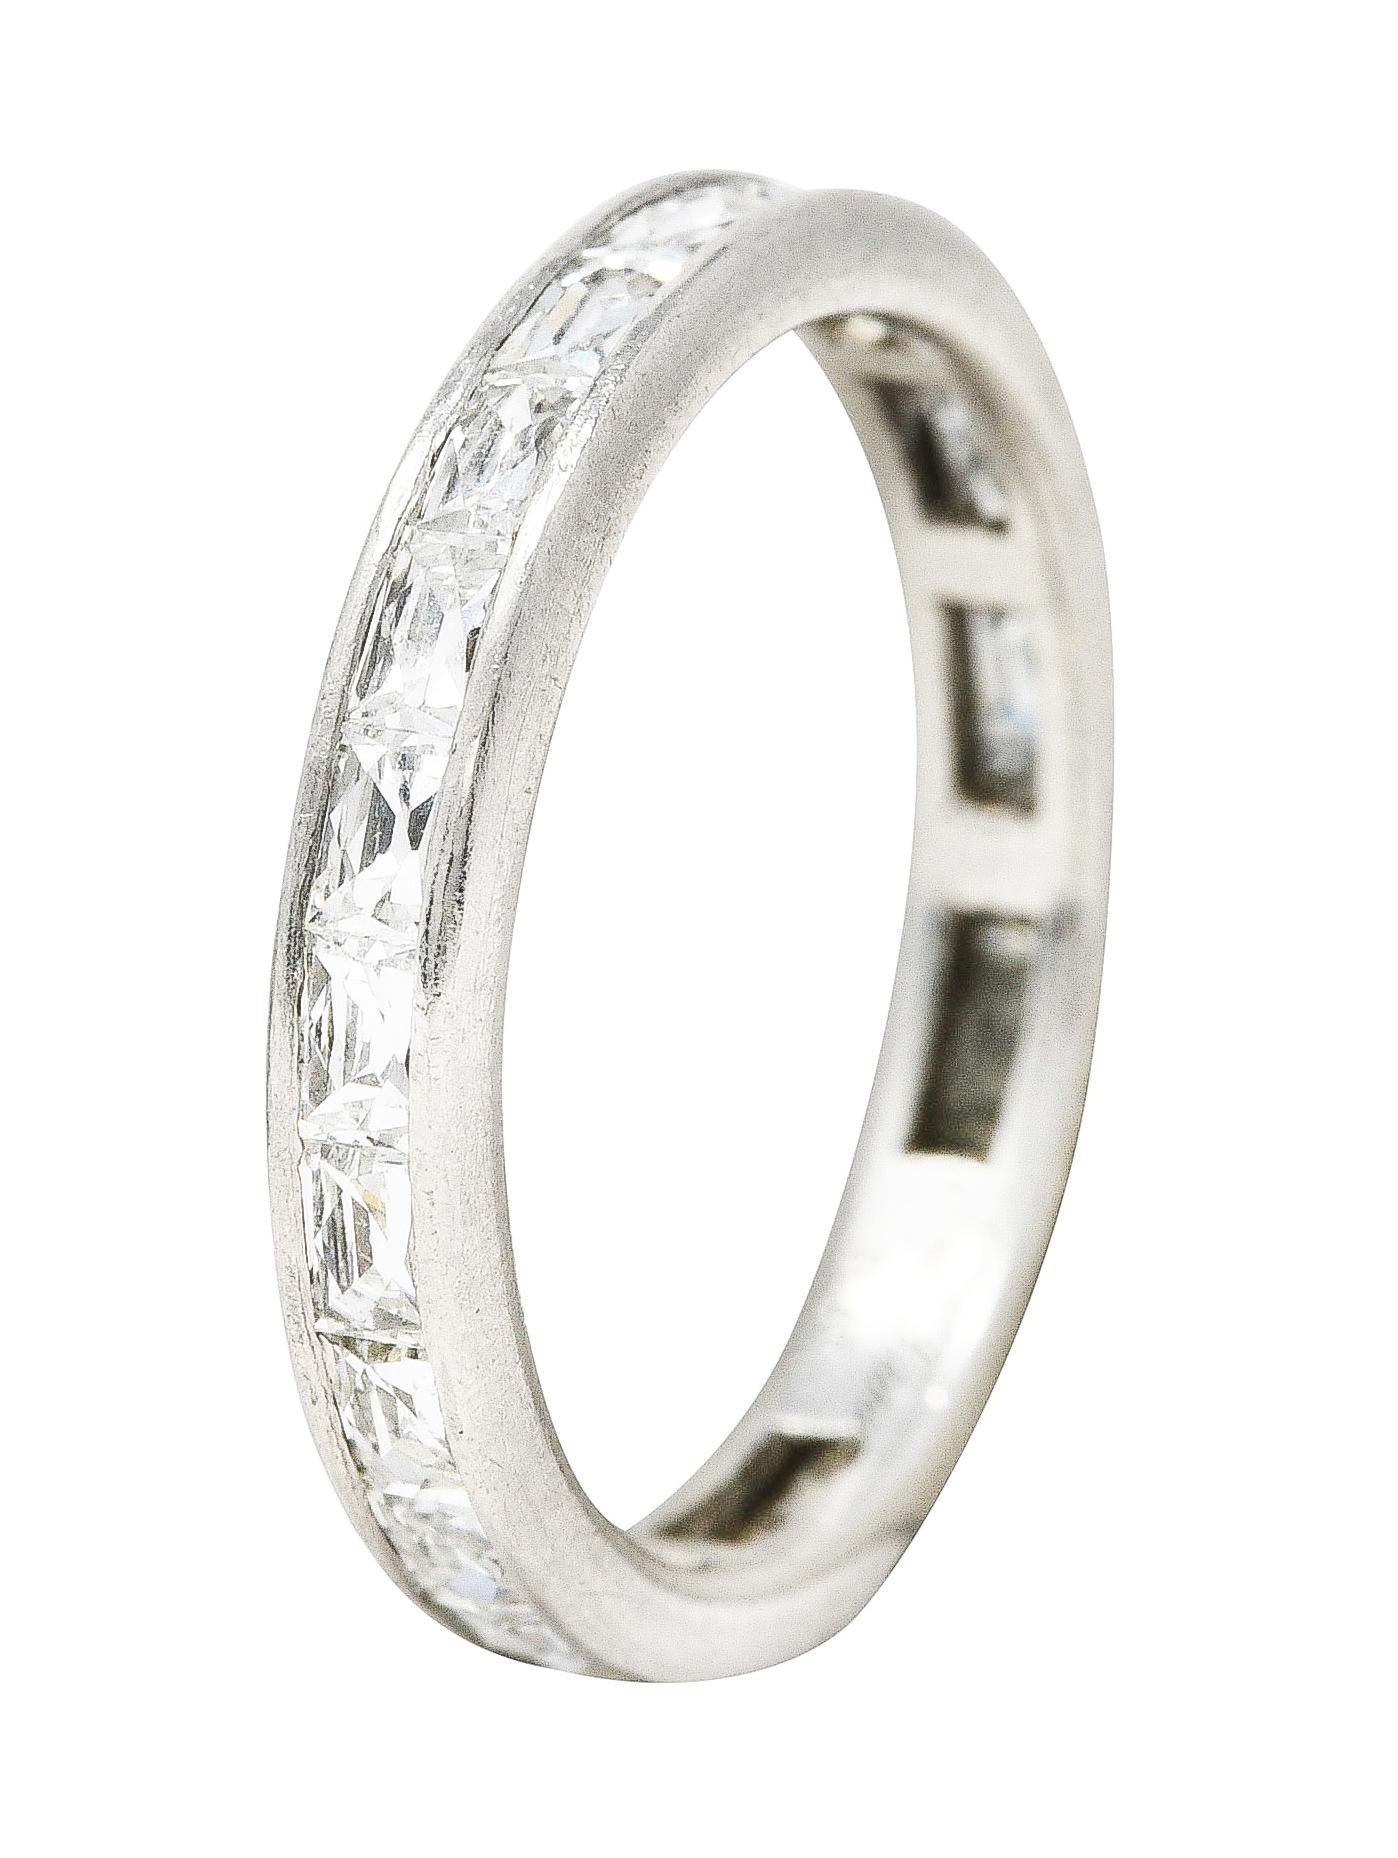 Ring features elongated French cut diamonds channel set fully around. Weighing approximately 2.05 carat total - G color with VS clarity. With high polished platinum finish. Stamped plat for platinum. Fully signed Neil Lane. Circa: 21st century. Ring